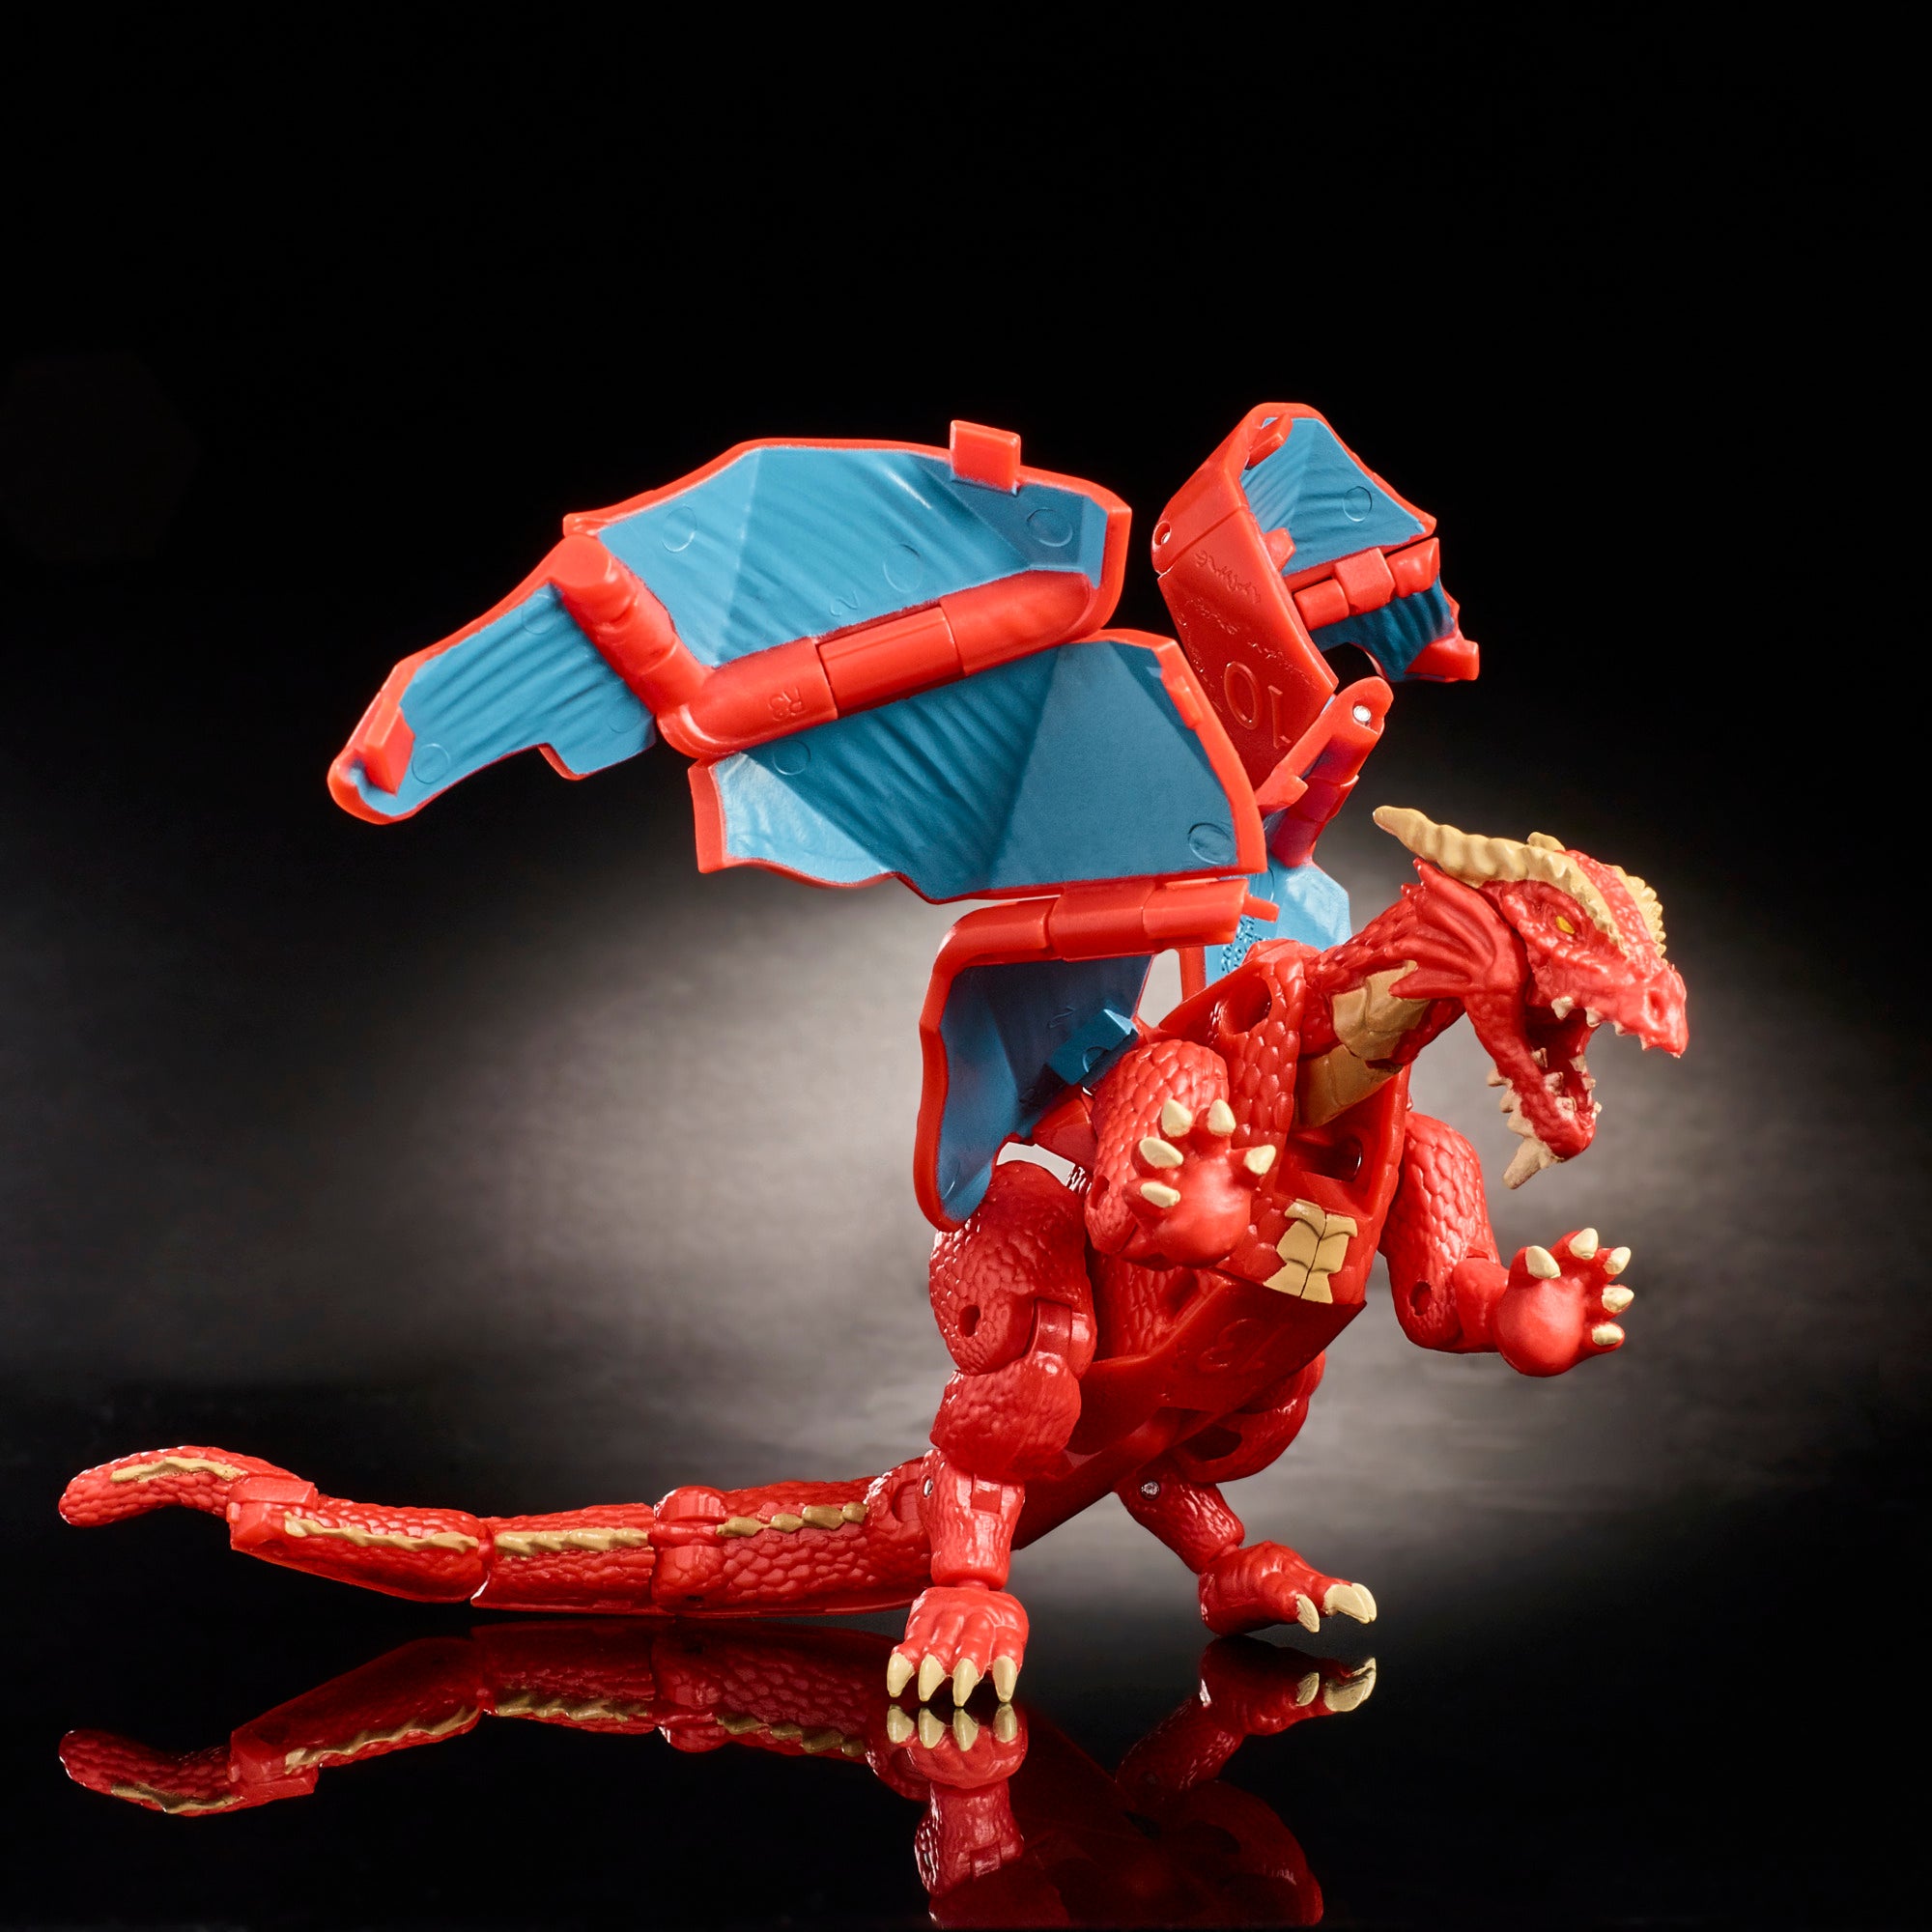 sagtmodighed Alt det bedste Flagermus Dungeons & Dragons Honor Among Thieves D&D Dicelings Red Dragon – Hasbro  Pulse - EU